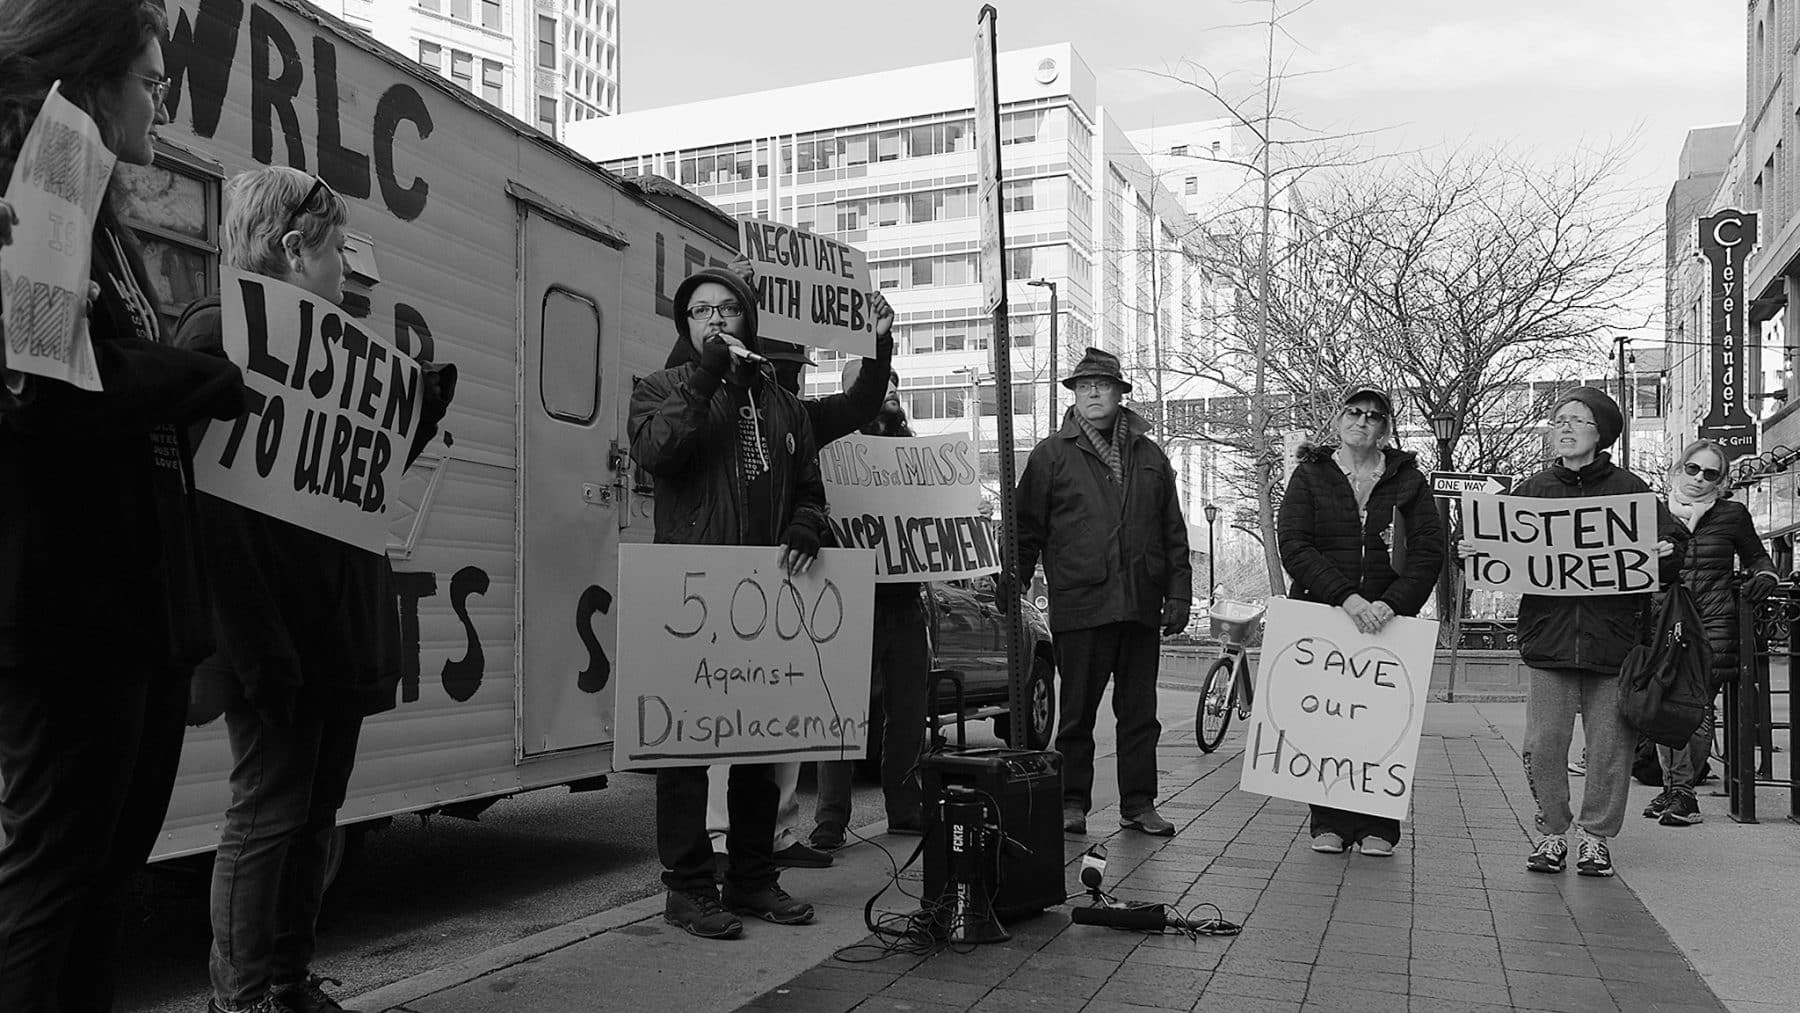 Seven people wearing jackets and caps on a city sidewalk holding signs that say "Listen to UREB," "Save Our Homes," "Negotiate with UREB," or "5,000 Against Displacement." One person is speaking into a microphone. At the curb by the speaker is a van with WRLC painted on the side, for Western Reserve Land Conservancy.